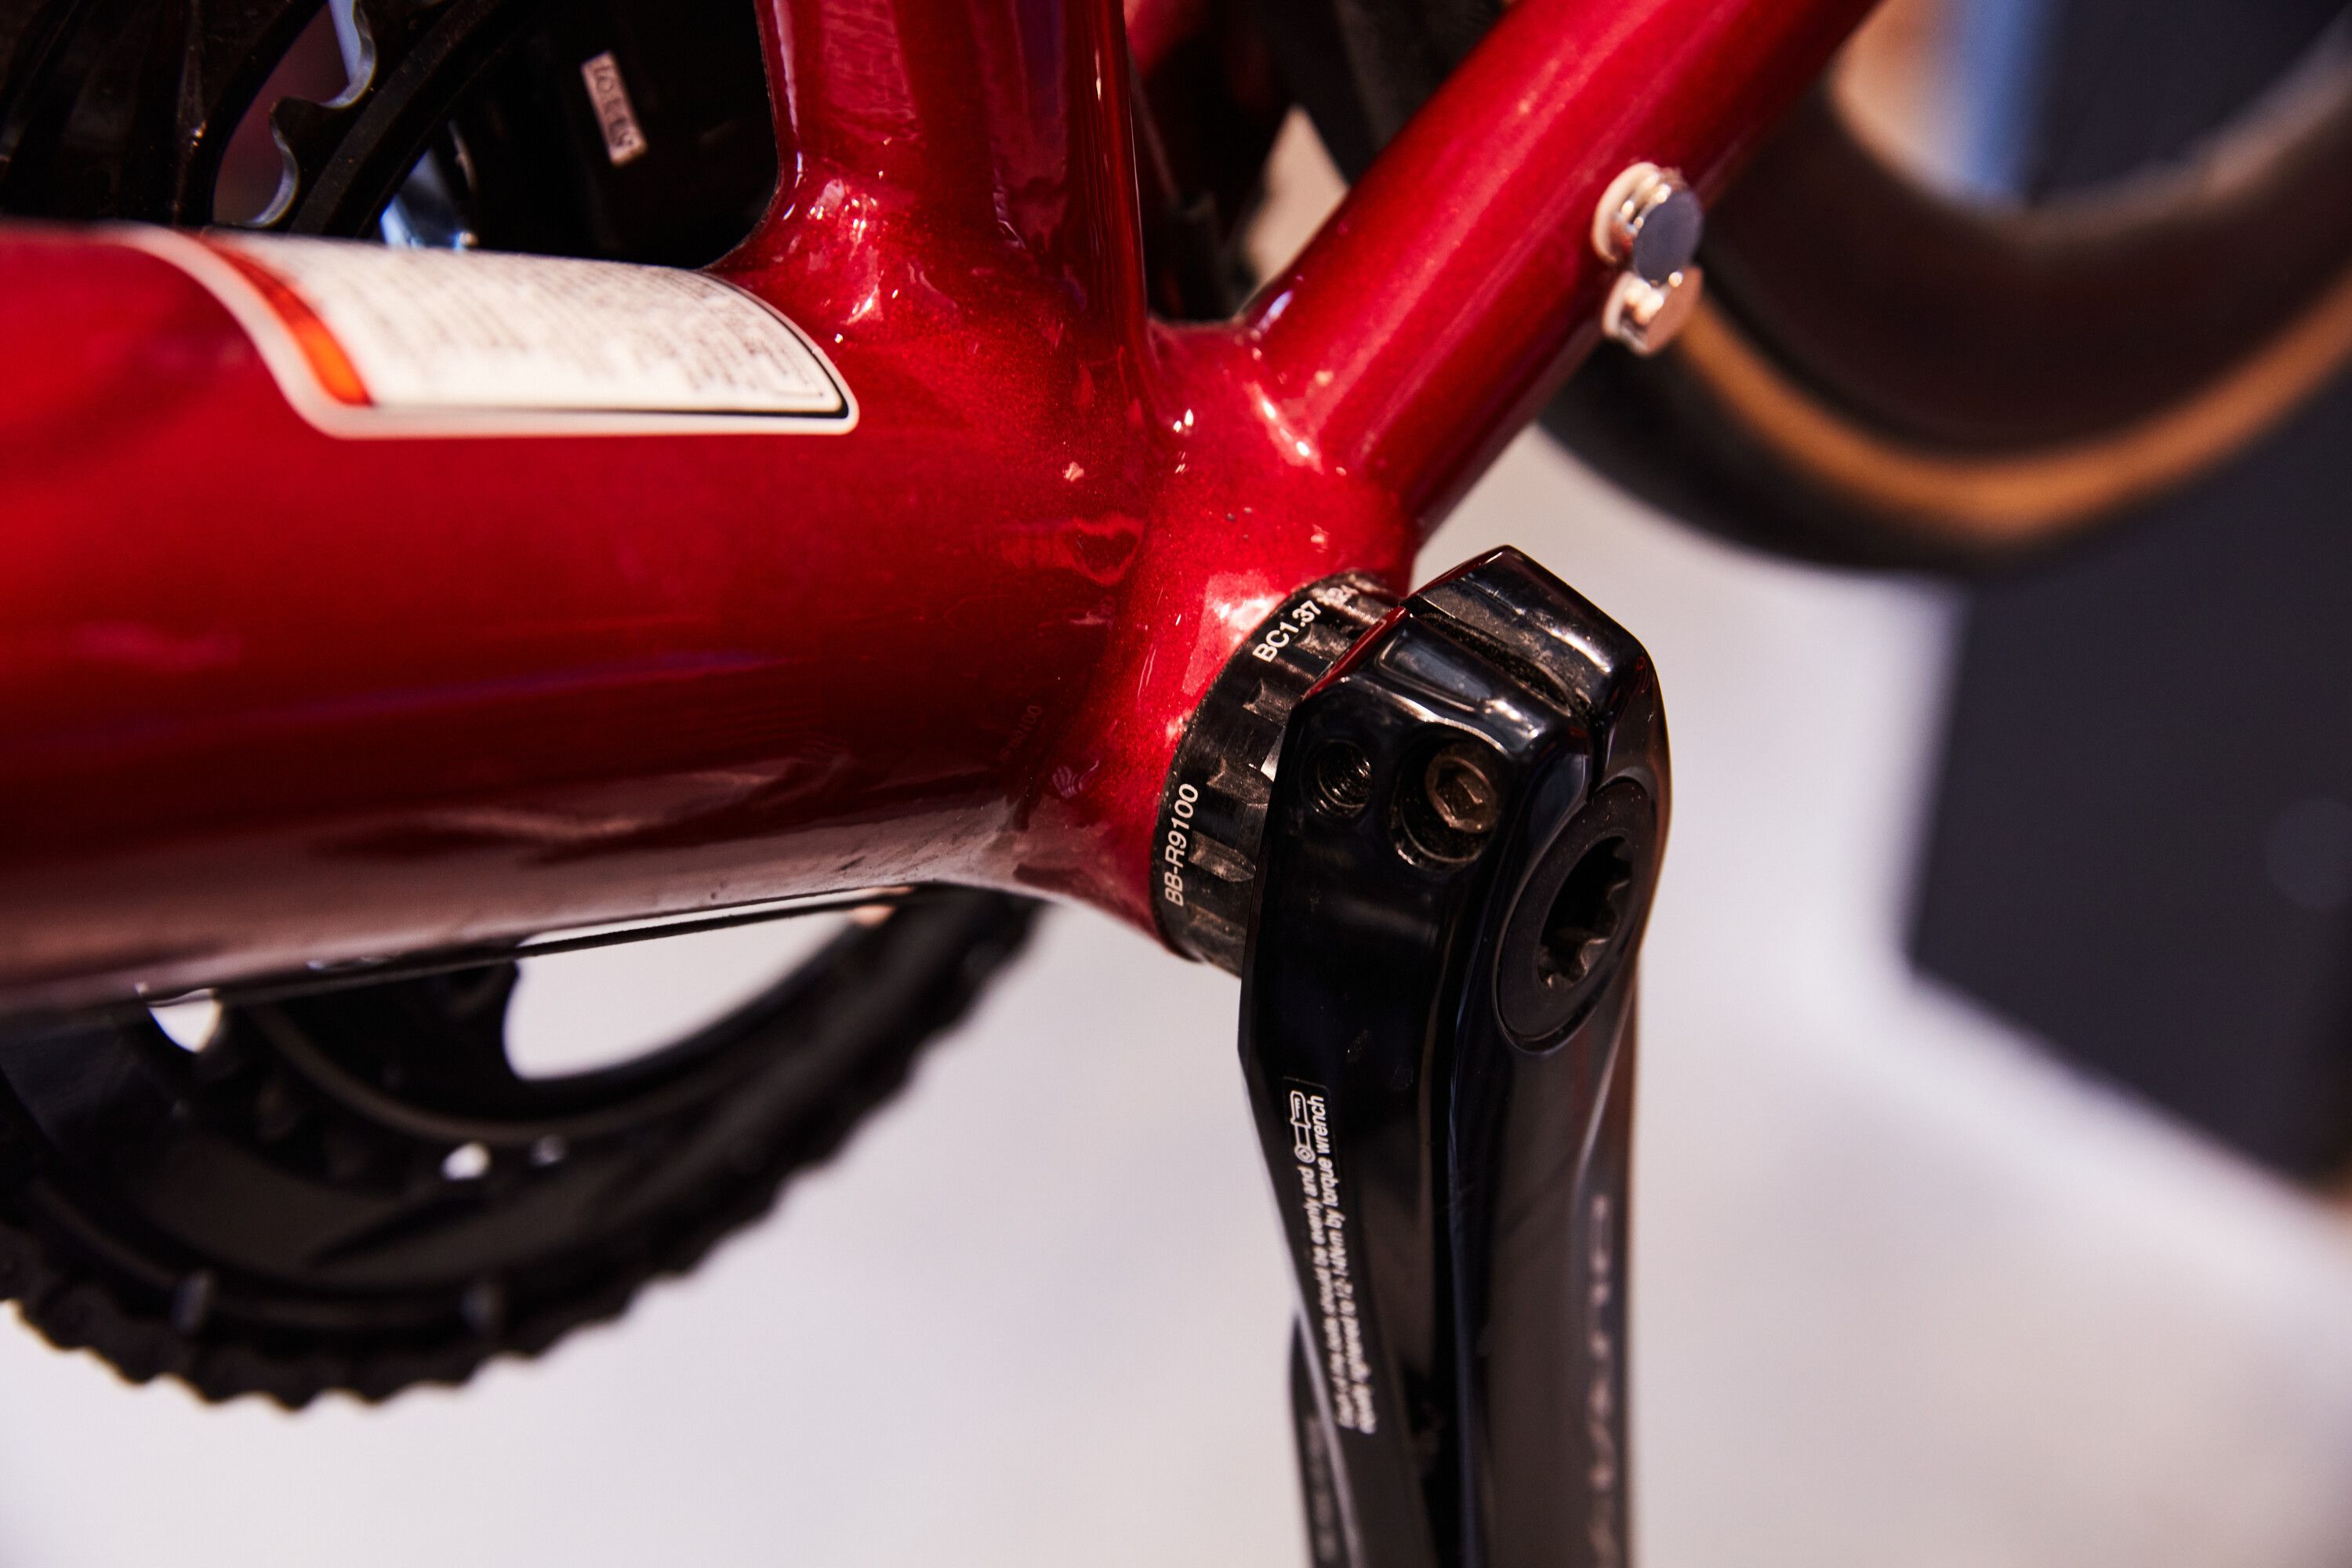 How to remove press-fit bottom bracket bearings in 12 easy steps